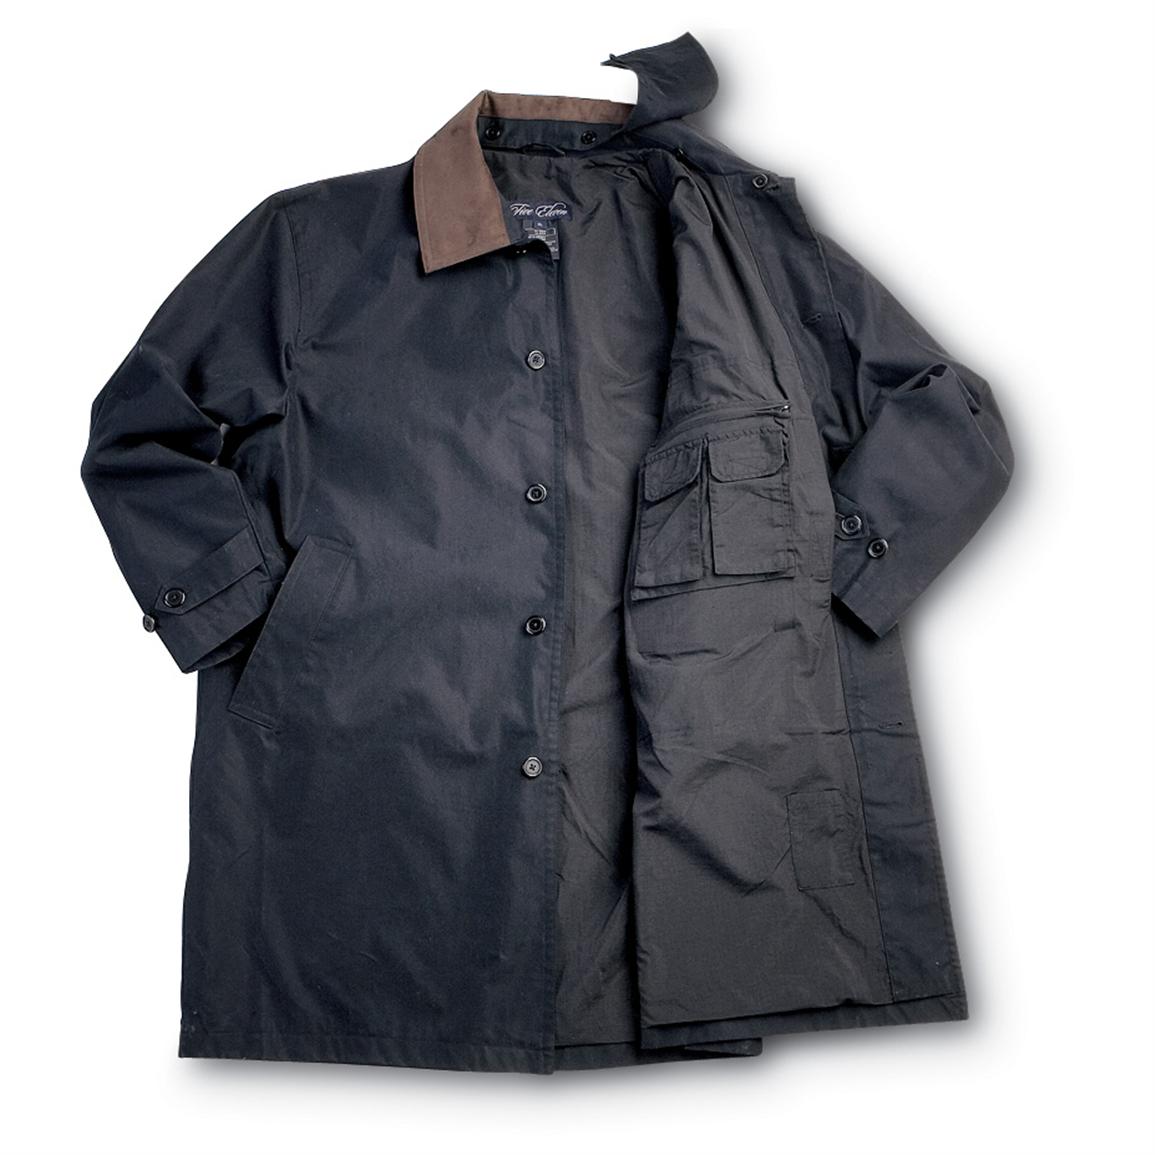 5.11® Tactical Undercover Trench Coat, Black - 111721, at Sportsman's Guide